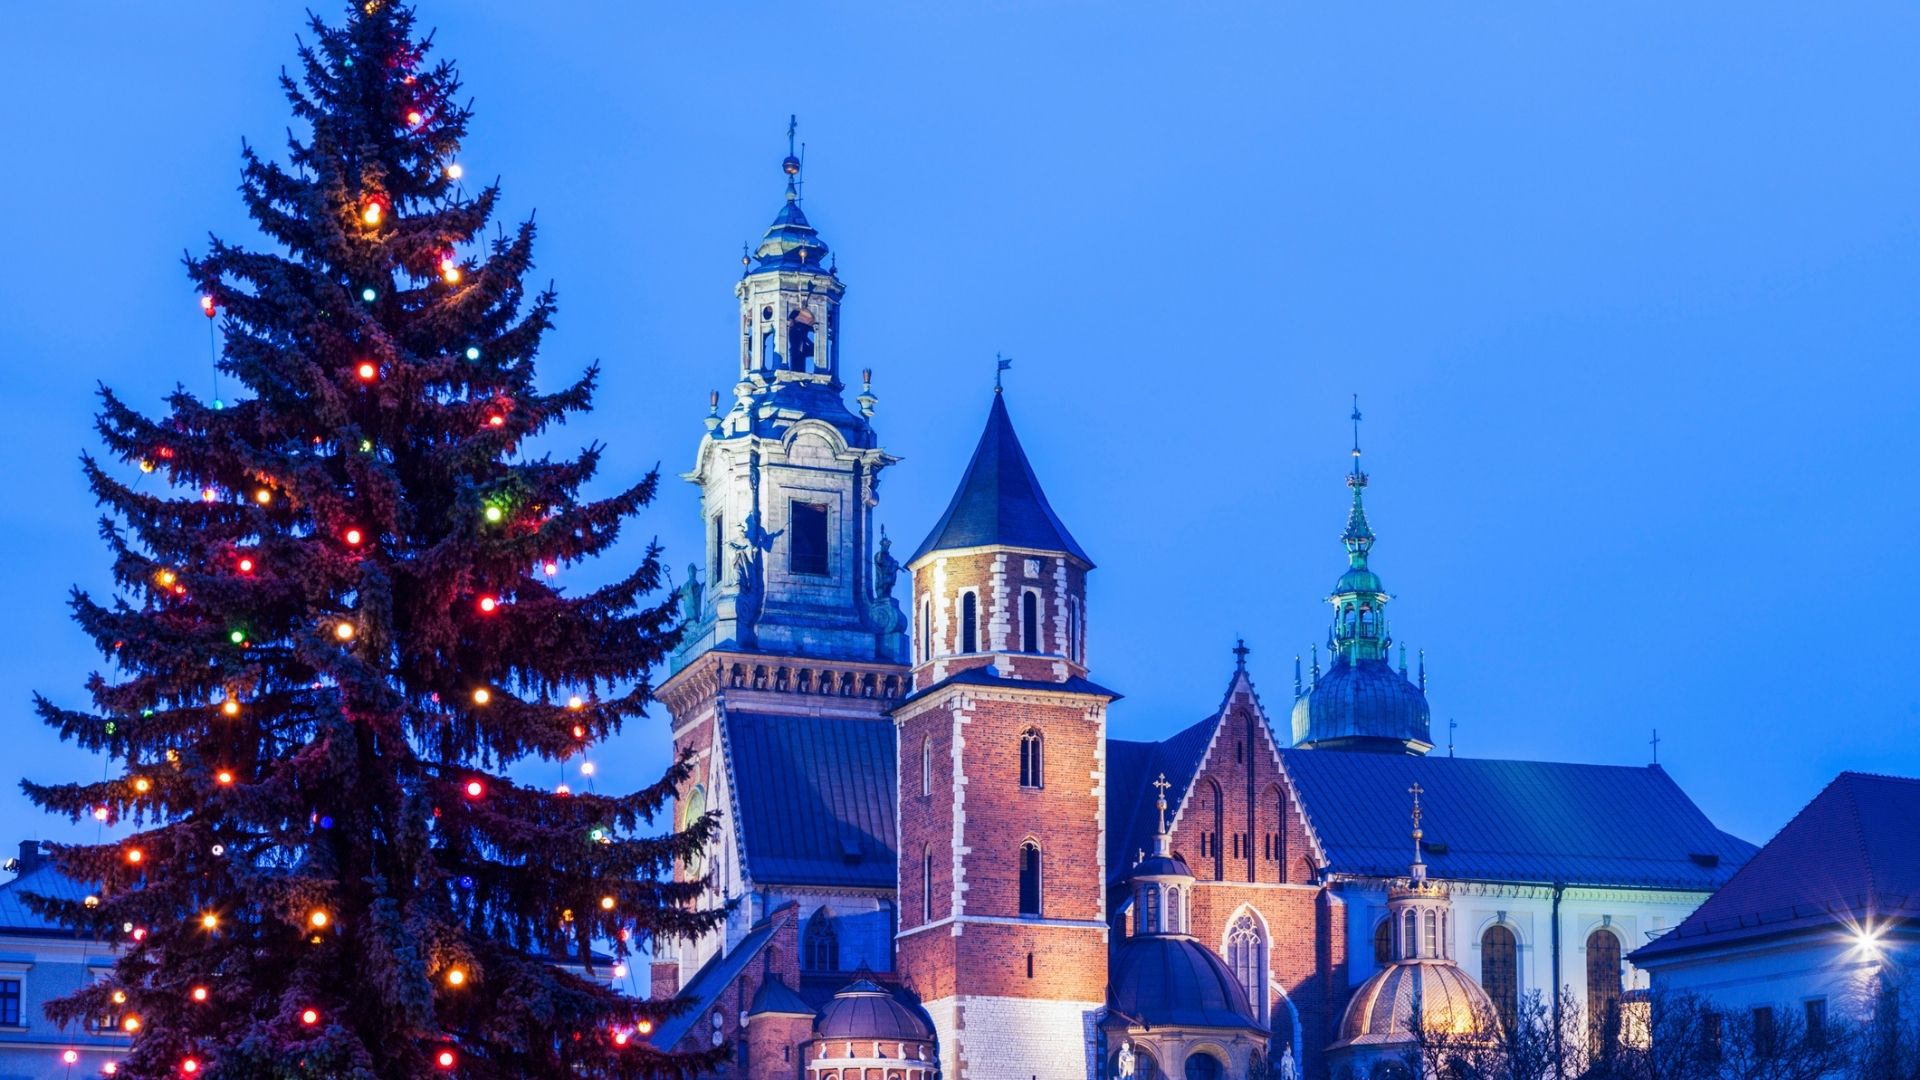 A large pine tree covered in Christmas lights is on the left and on the right is a large old church.